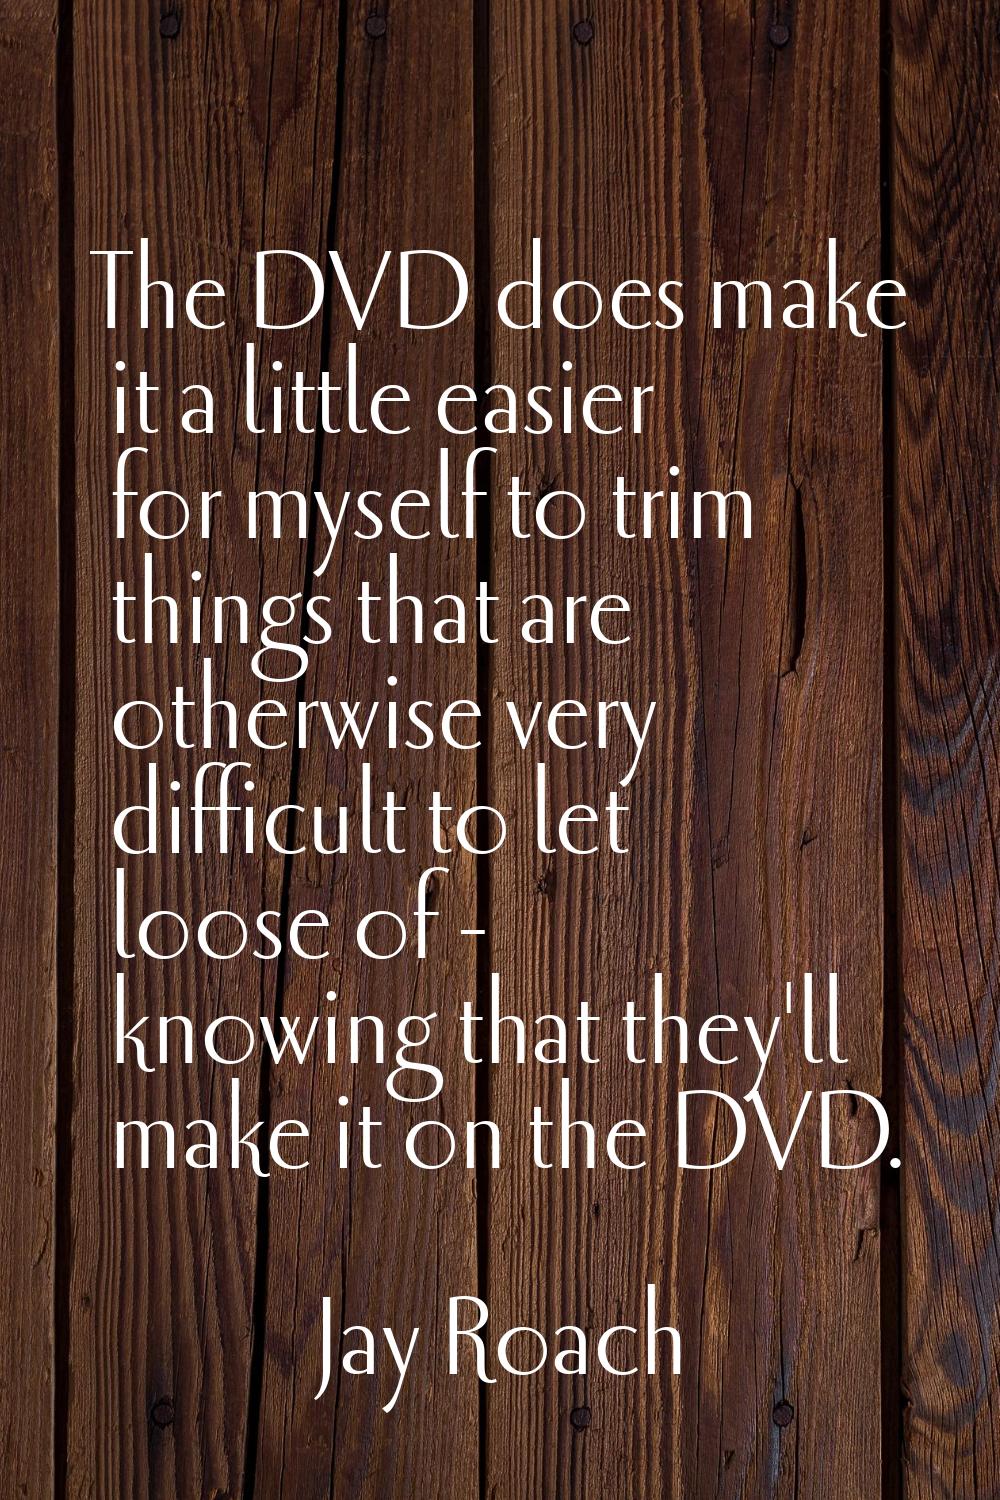 The DVD does make it a little easier for myself to trim things that are otherwise very difficult to